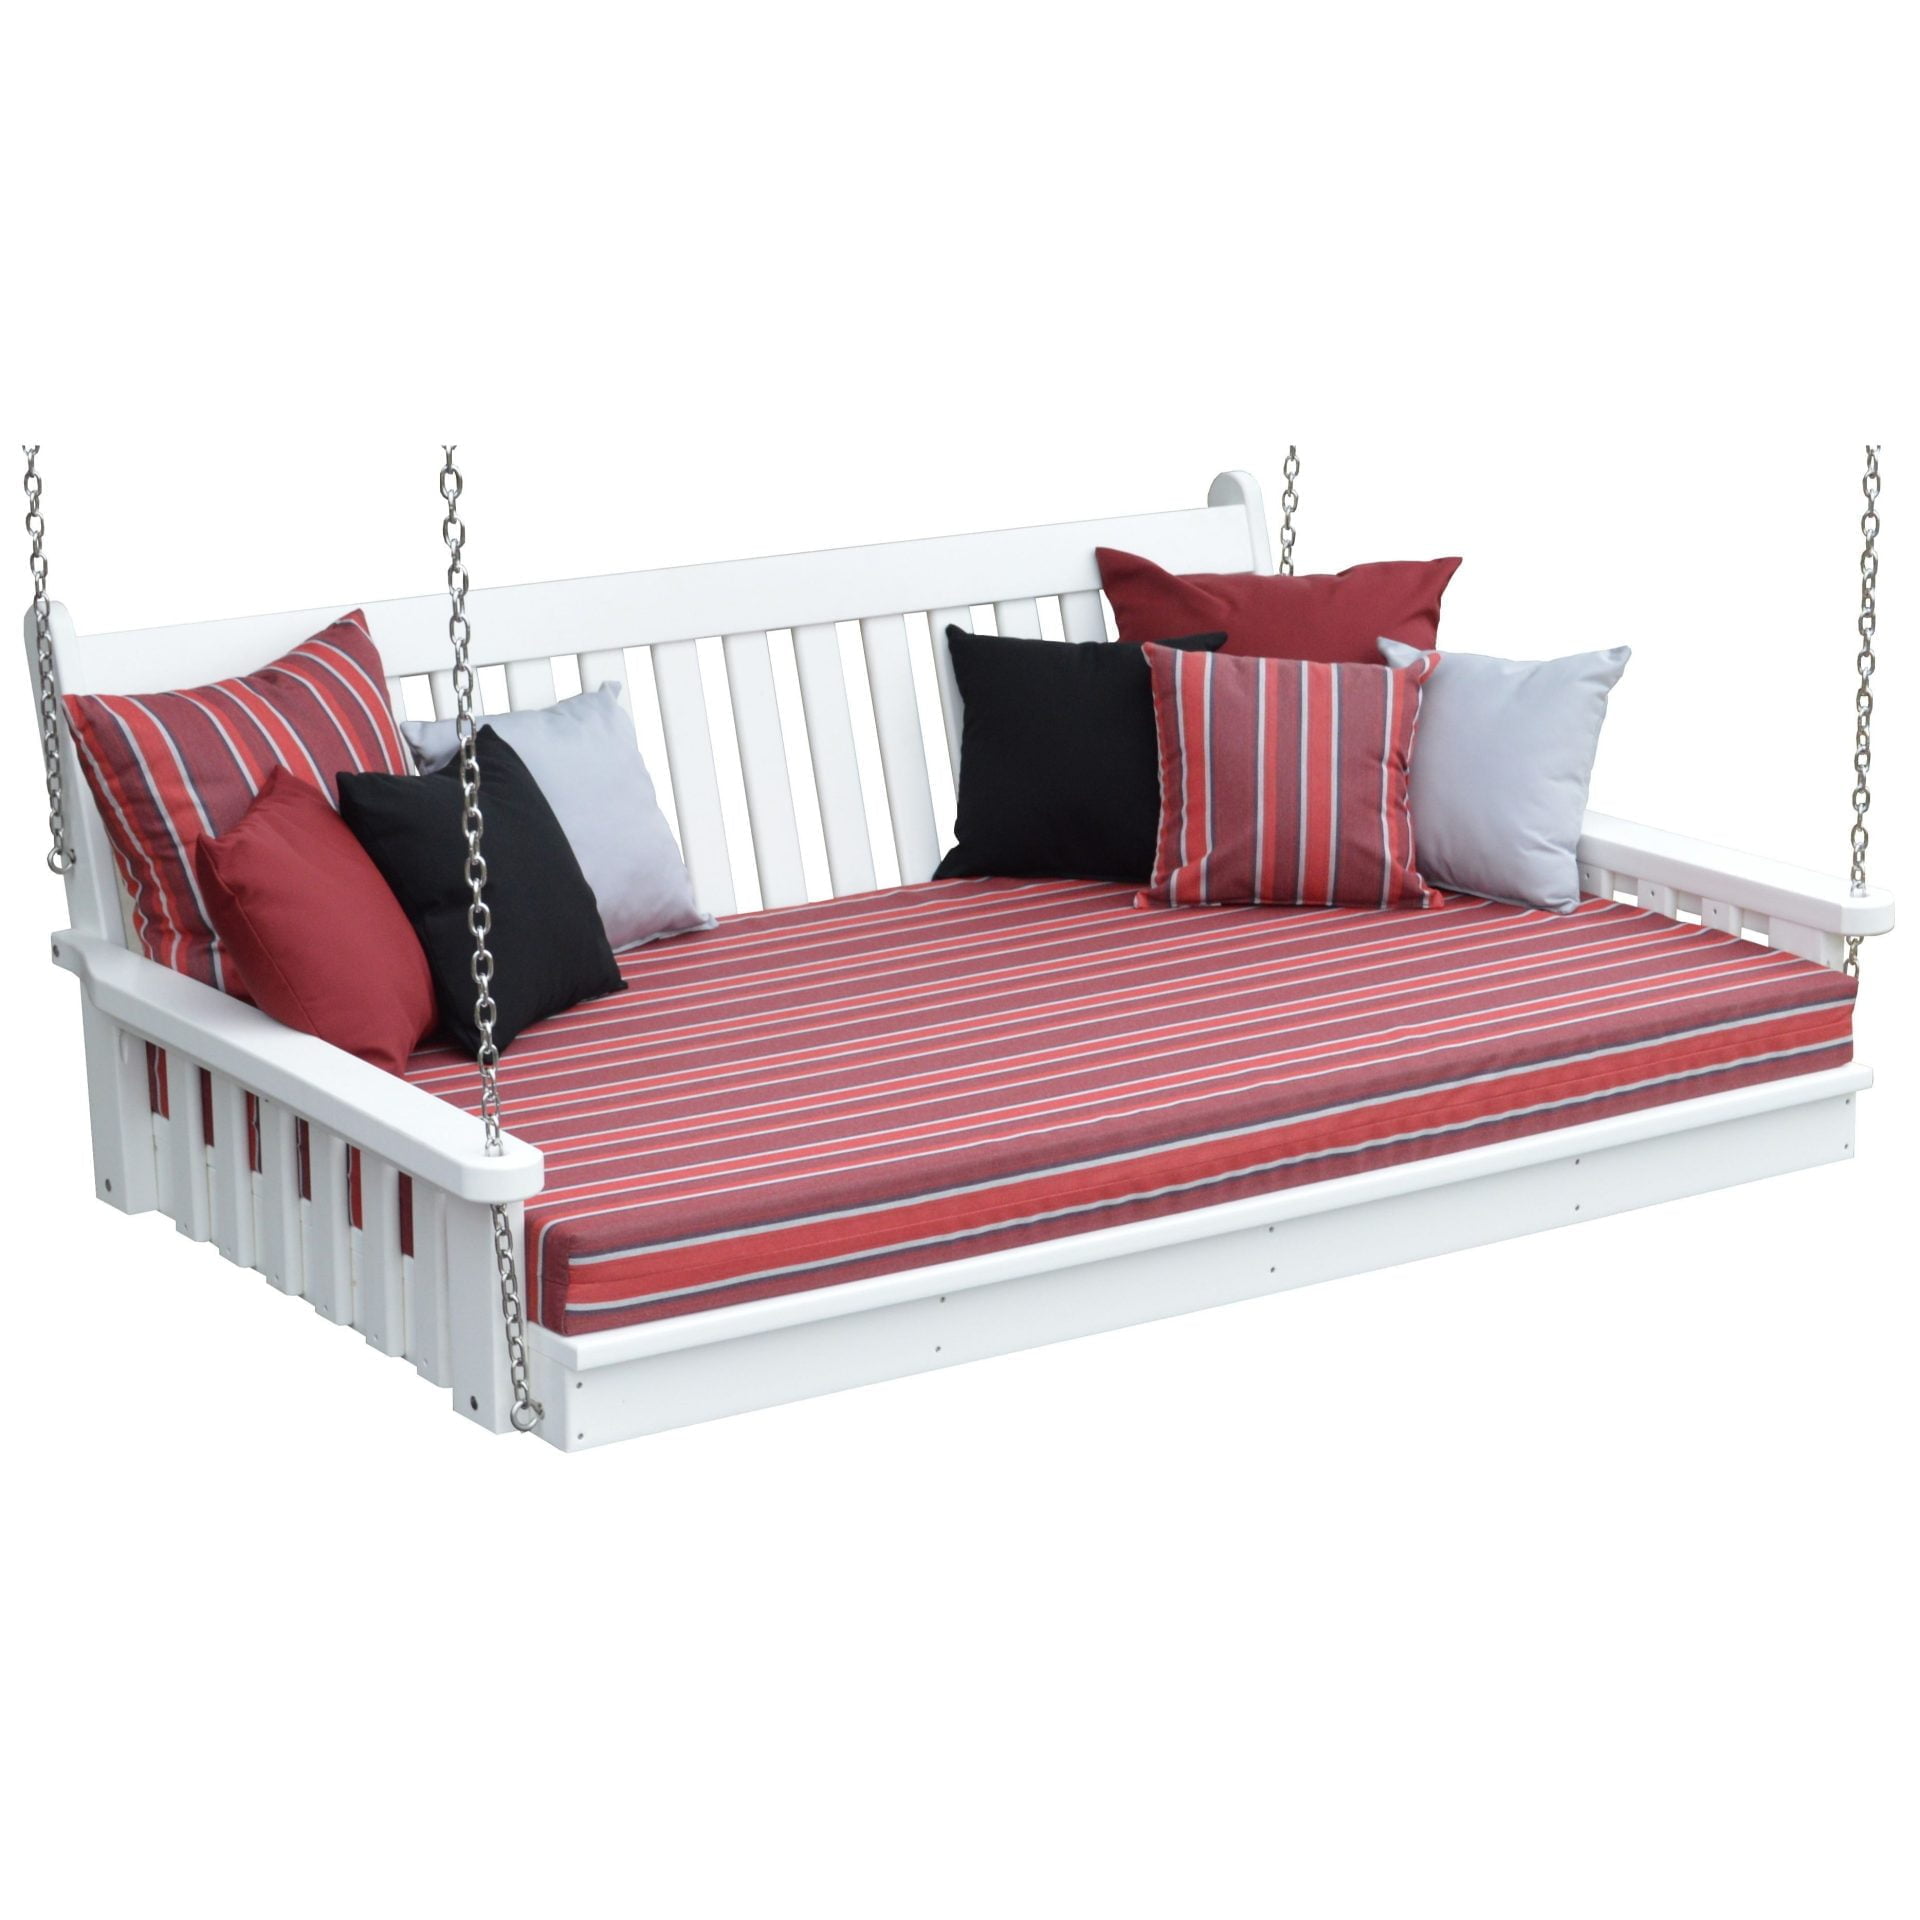 Poly Lumber Traditional English Swing Bed